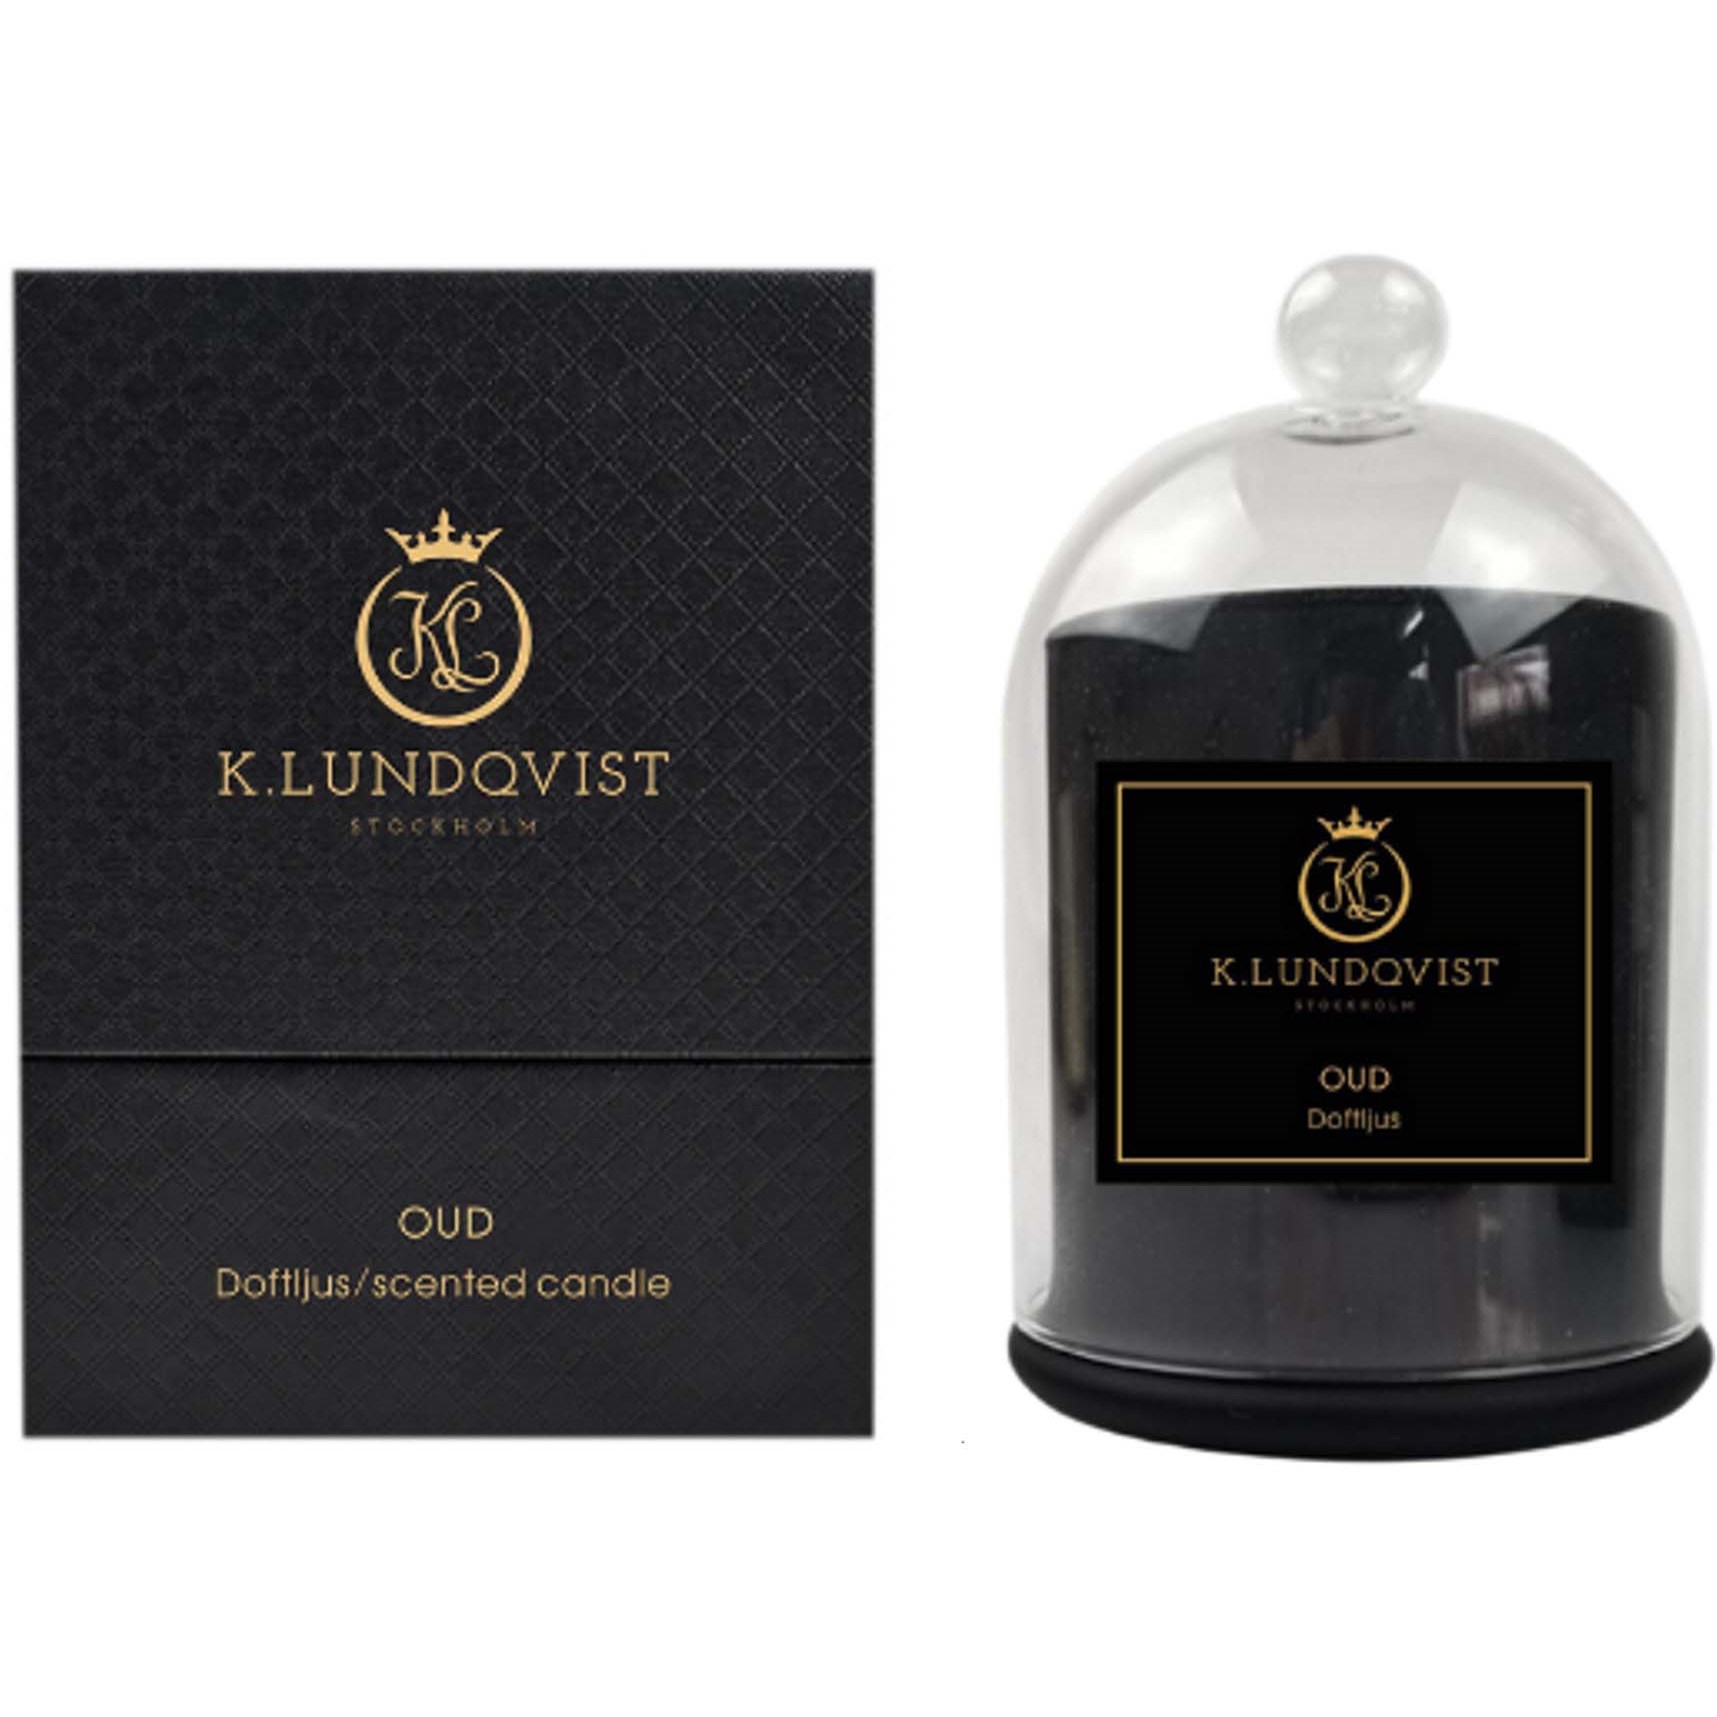 K. Lundqvist Stockholm Scented Candle Oud/Musk & Oud 300 g